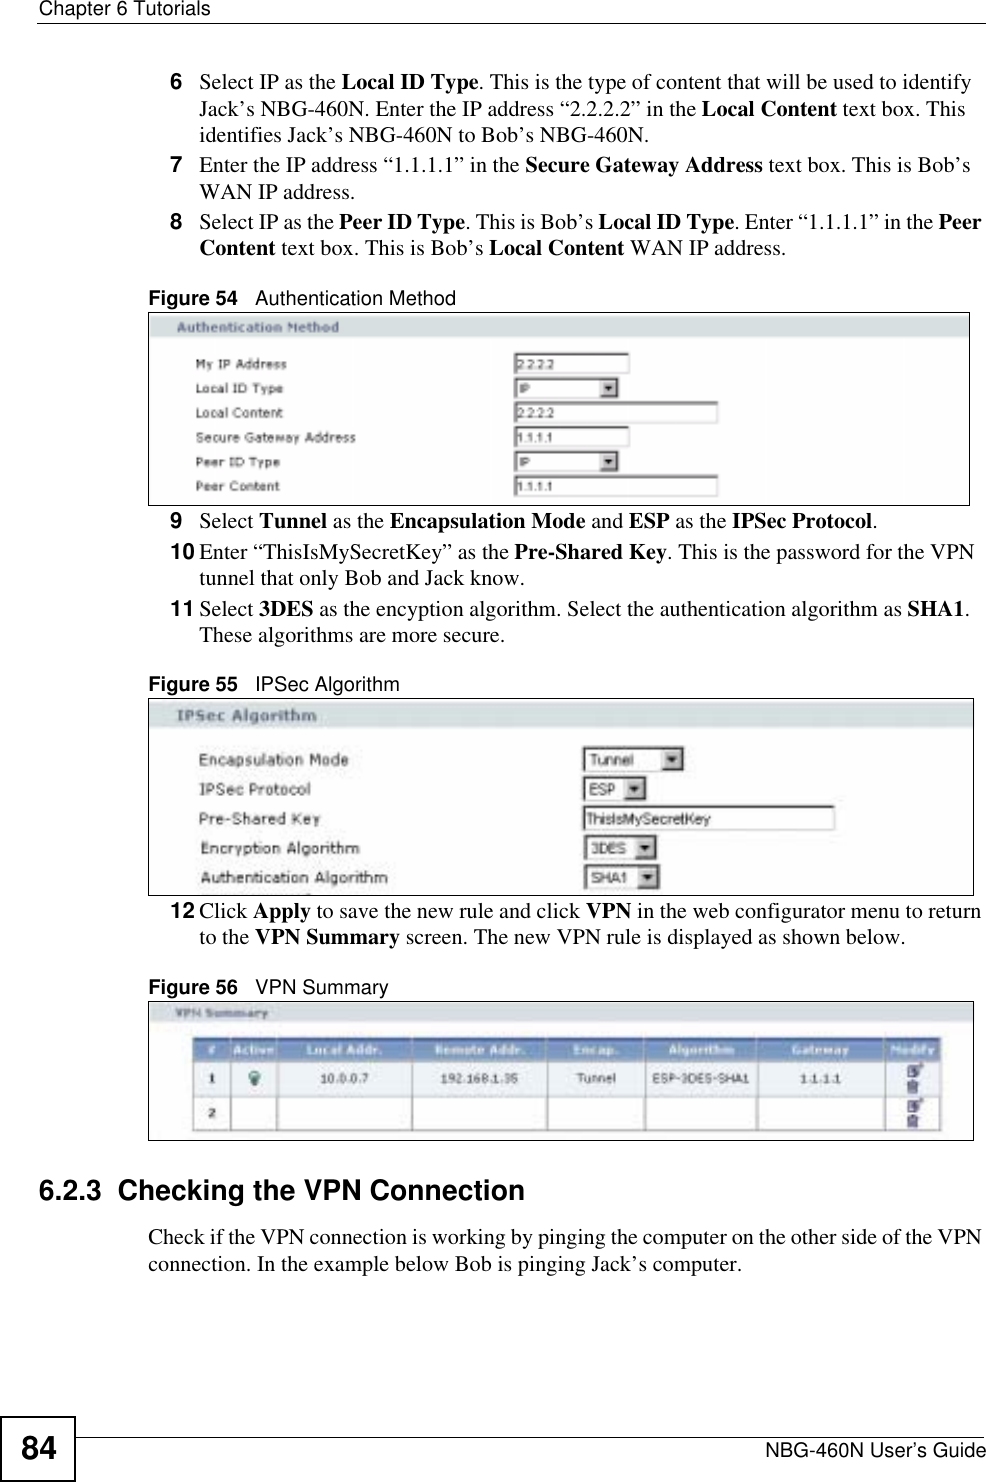 Chapter 6 TutorialsNBG-460N User’s Guide846Select IP as the Local ID Type. This is the type of content that will be used to identify Jack’s NBG-460N. Enter the IP address “2.2.2.2” in the Local Content text box. This identifies Jack’s NBG-460N to Bob’s NBG-460N.7Enter the IP address “1.1.1.1” in the Secure Gateway Address text box. This is Bob’s WAN IP address.8Select IP as the Peer ID Type. This is Bob’s Local ID Type. Enter “1.1.1.1” in the PeerContent text box. This is Bob’s Local Content WAN IP address.Figure 54   Authentication Method9Select Tunnel as the Encapsulation Mode and ESP as the IPSec Protocol.10 Enter “ThisIsMySecretKey” as the Pre-Shared Key. This is the password for the VPN tunnel that only Bob and Jack know.11 Select 3DES as the encyption algorithm. Select the authentication algorithm as SHA1.These algorithms are more secure.Figure 55   IPSec Algorithm12 Click Apply to save the new rule and click VPN in the web configurator menu to return to the VPN Summary screen. The new VPN rule is displayed as shown below.Figure 56   VPN Summary6.2.3  Checking the VPN ConnectionCheck if the VPN connection is working by pinging the computer on the other side of the VPN connection. In the example below Bob is pinging Jack’s computer.